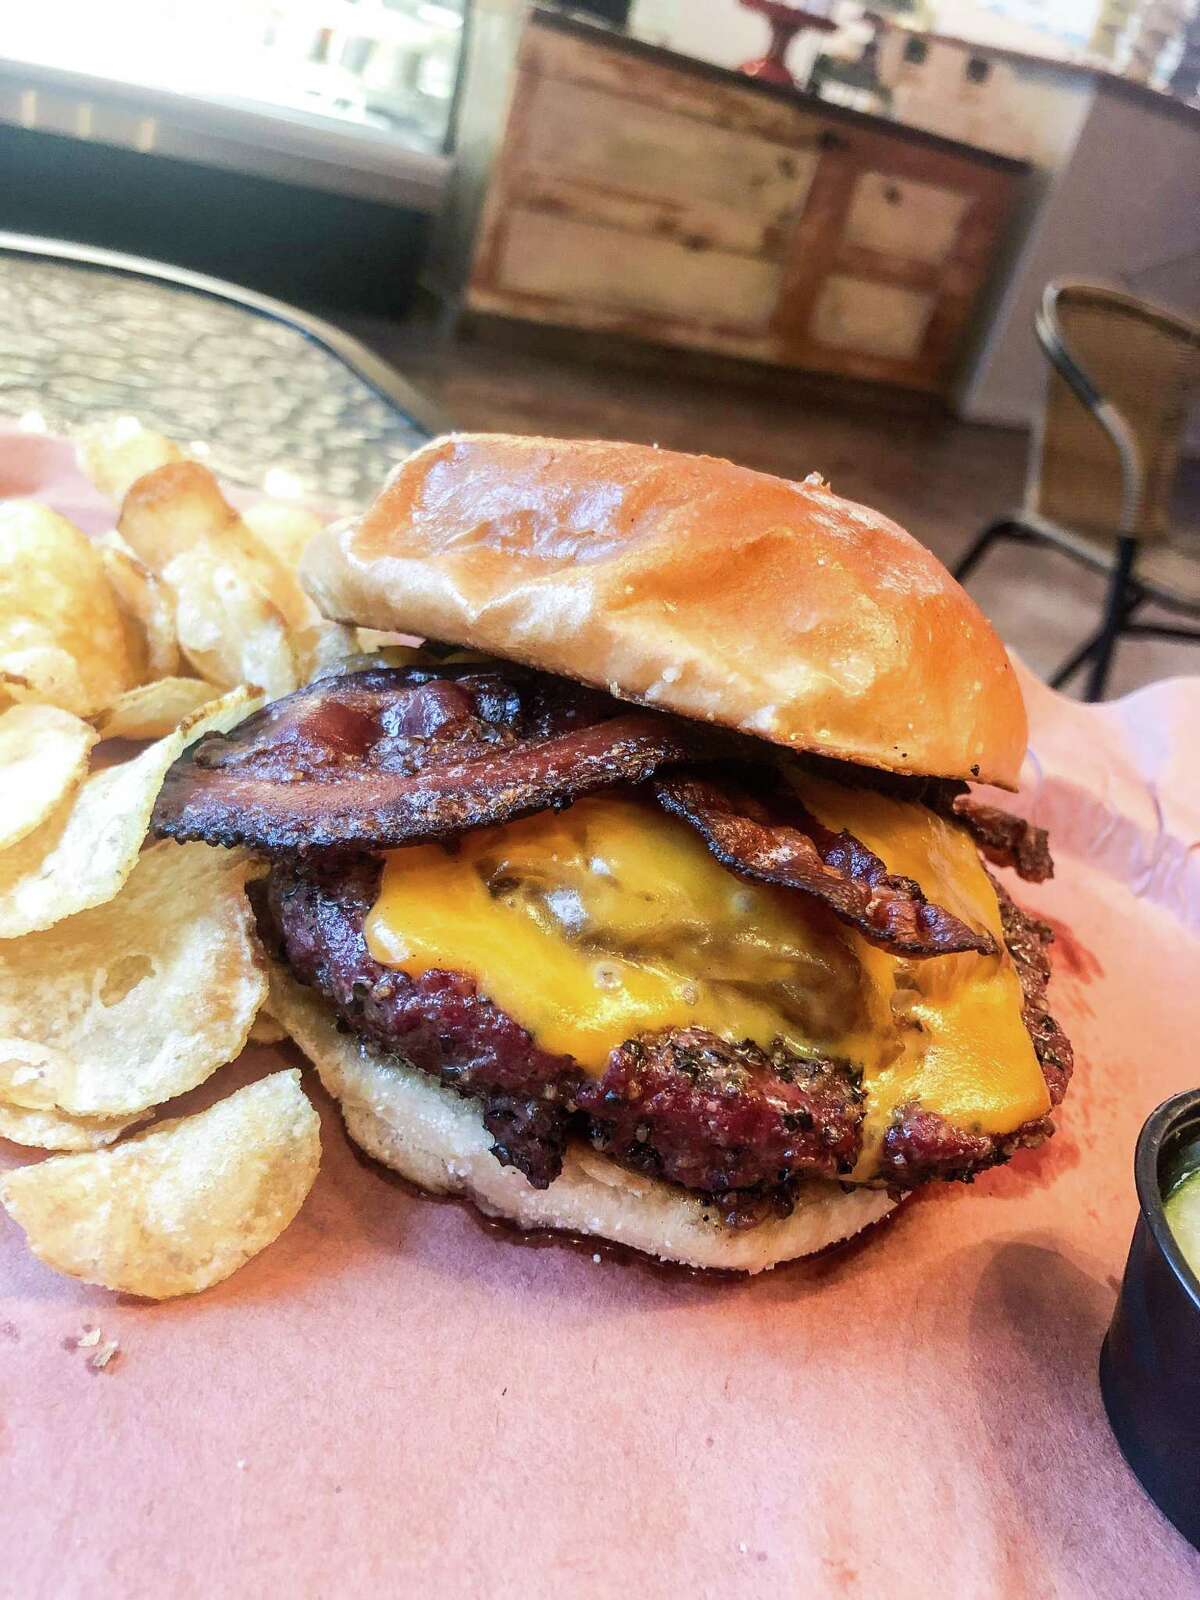 The Smokehouse Burger at Tejas Chocolate & Barbecue in Tomball is available on Wednesdays.